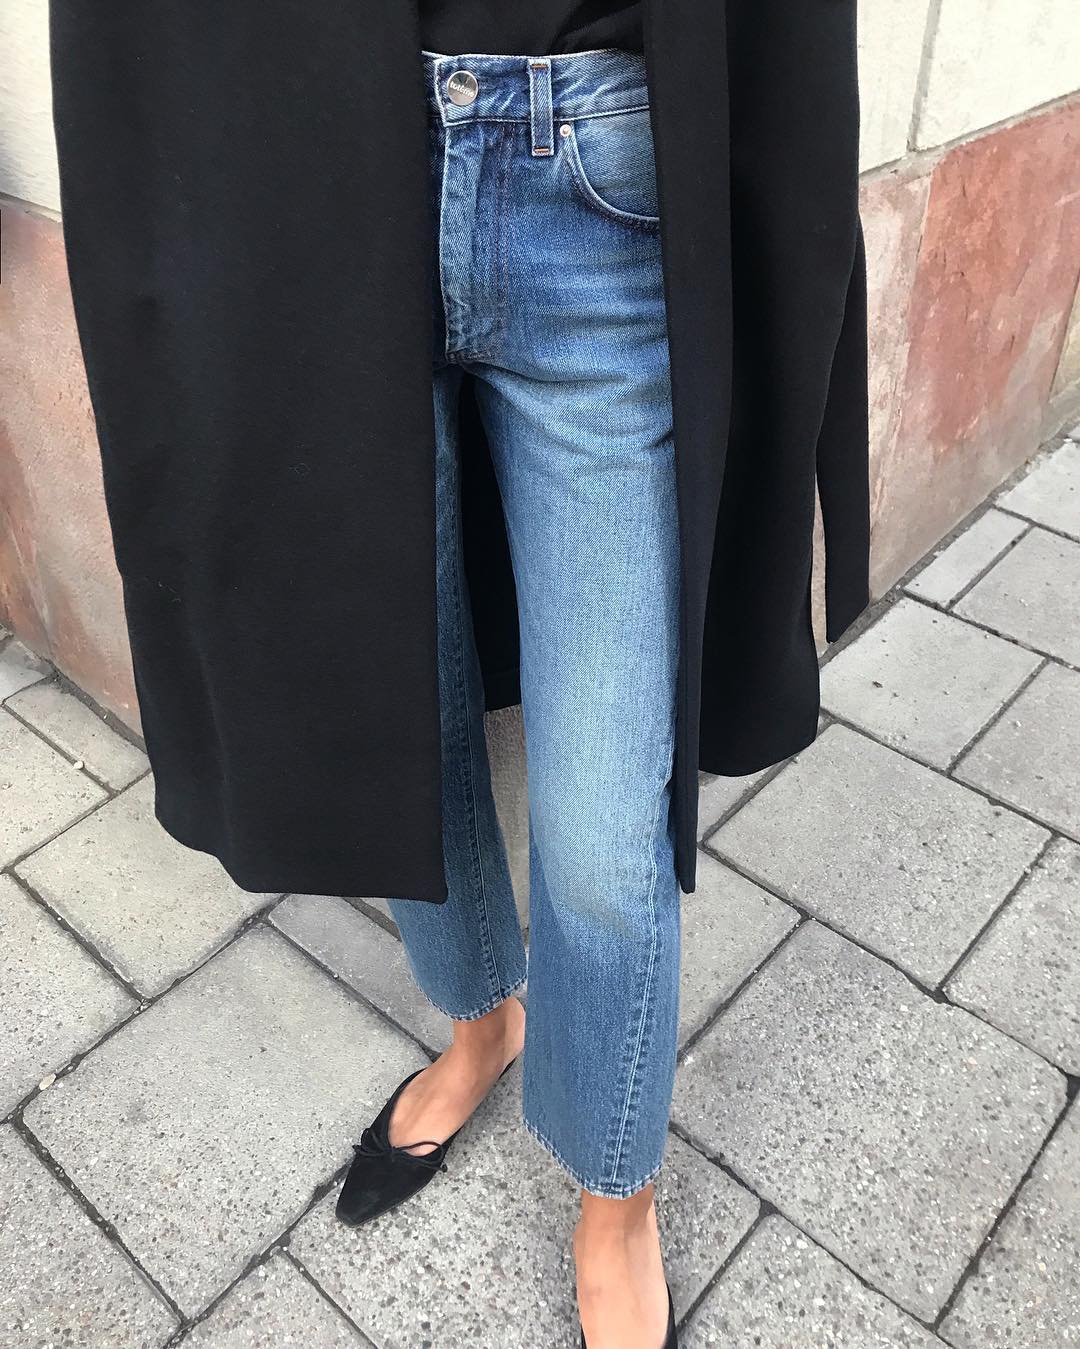 Minimalist Fall Outfit Inspiration — Black Coat, Jeans, and Manolo Blahnik Mule Flats